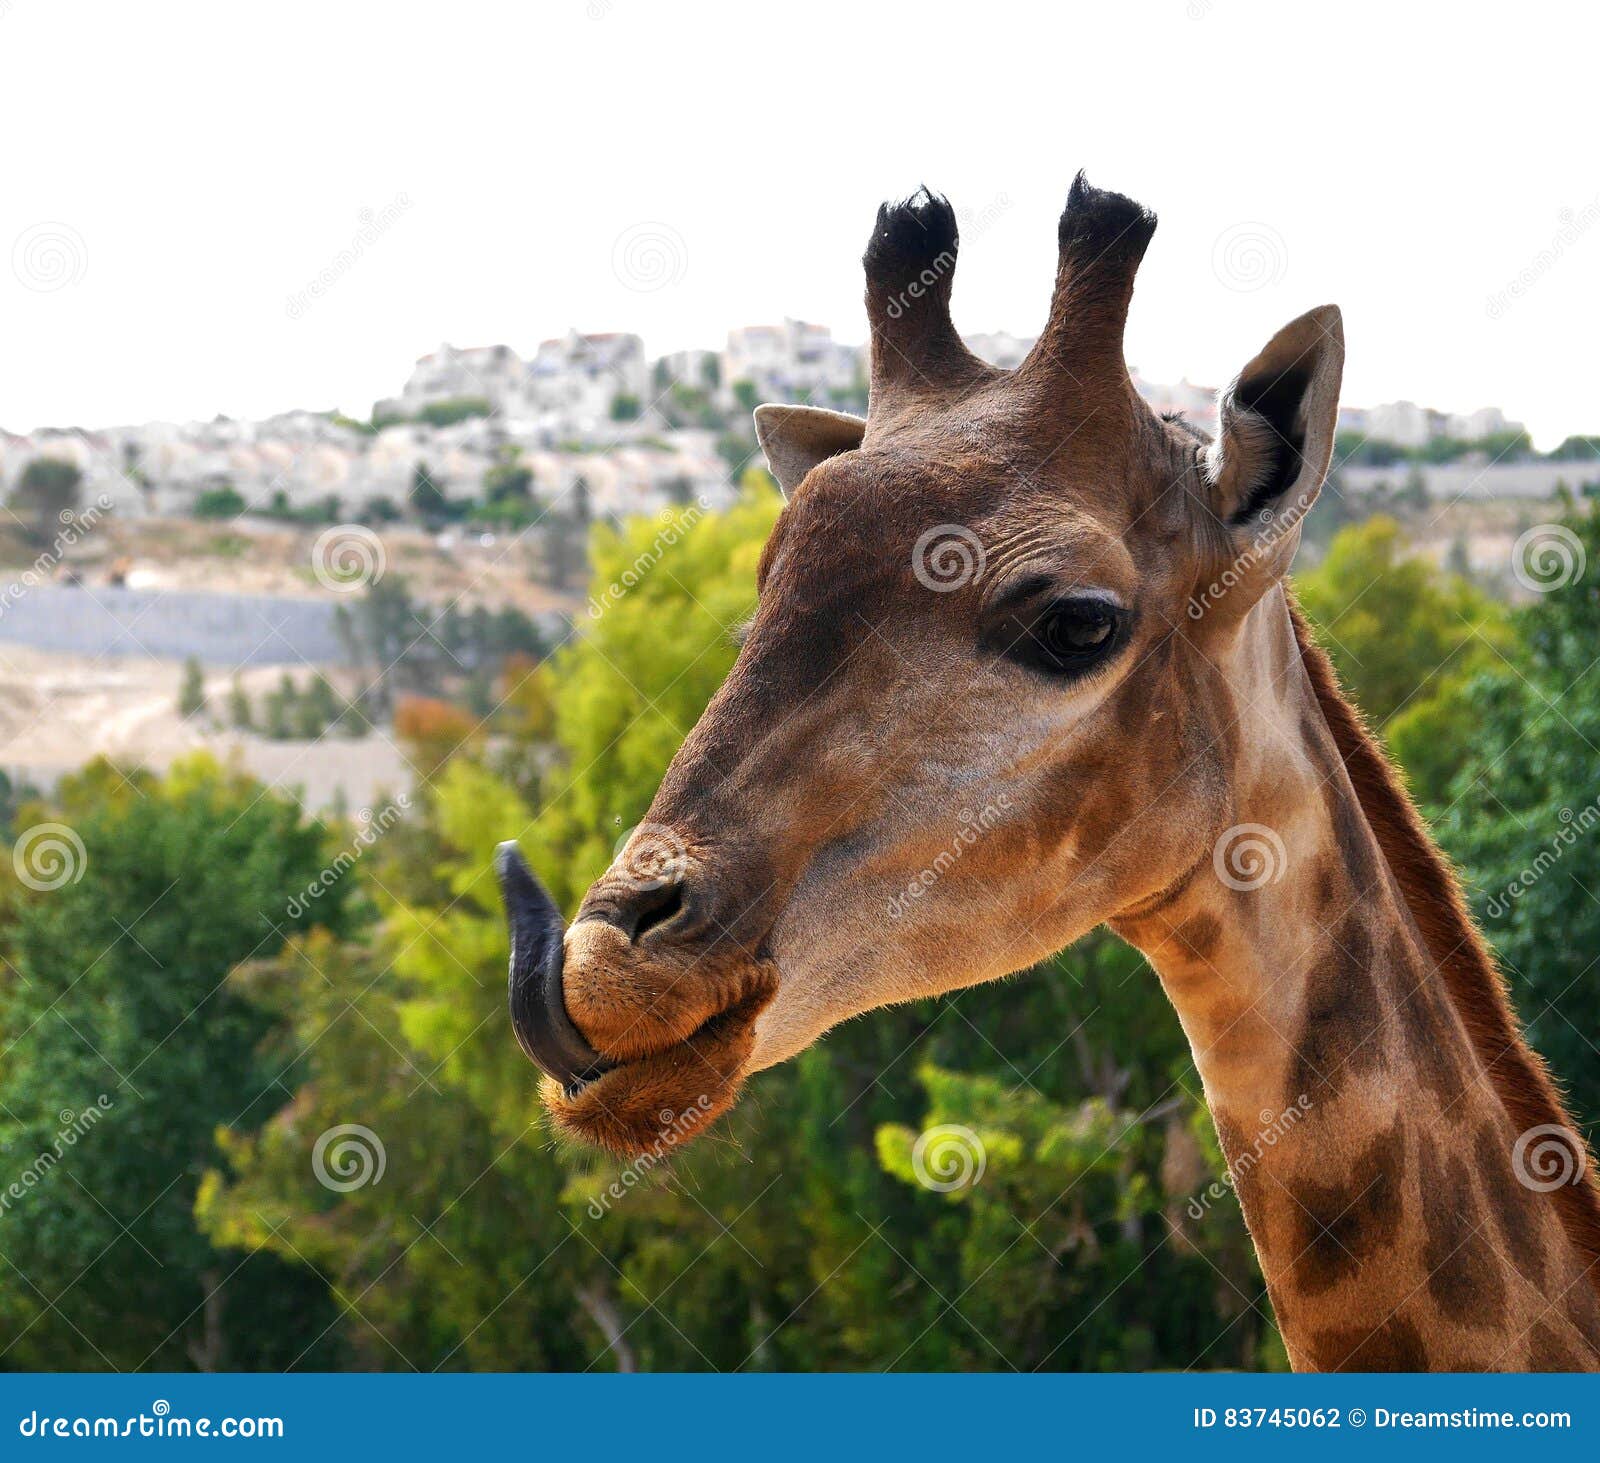 Giraffe Sticking Out Its Tongue Stock Photo - Image of ...